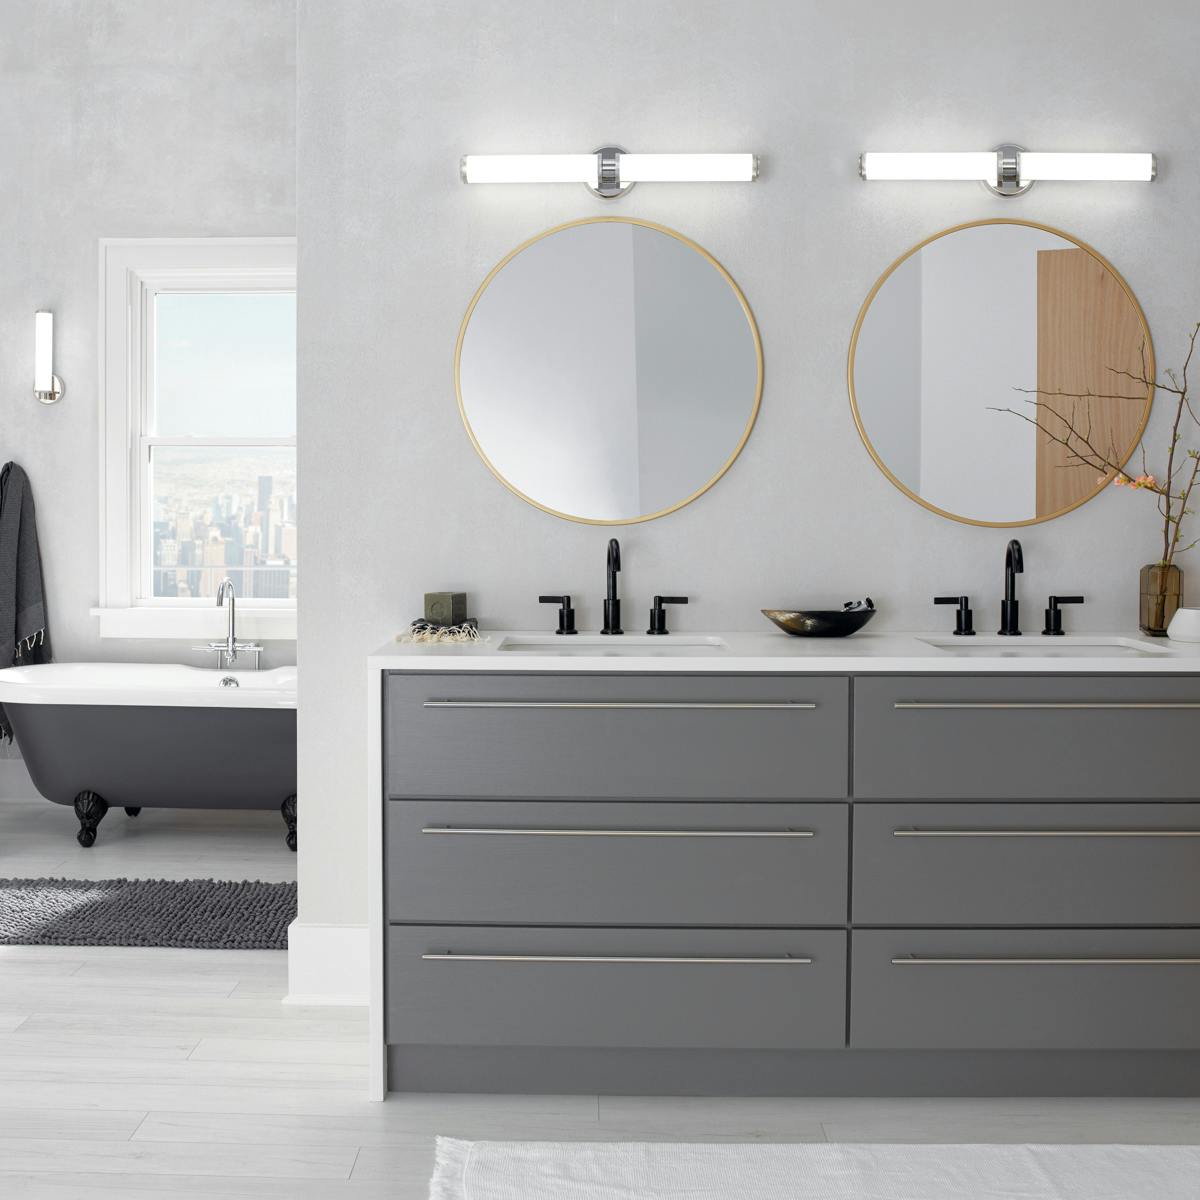 Day time Bathroom featuring Indeco vanity light 45685PNLED